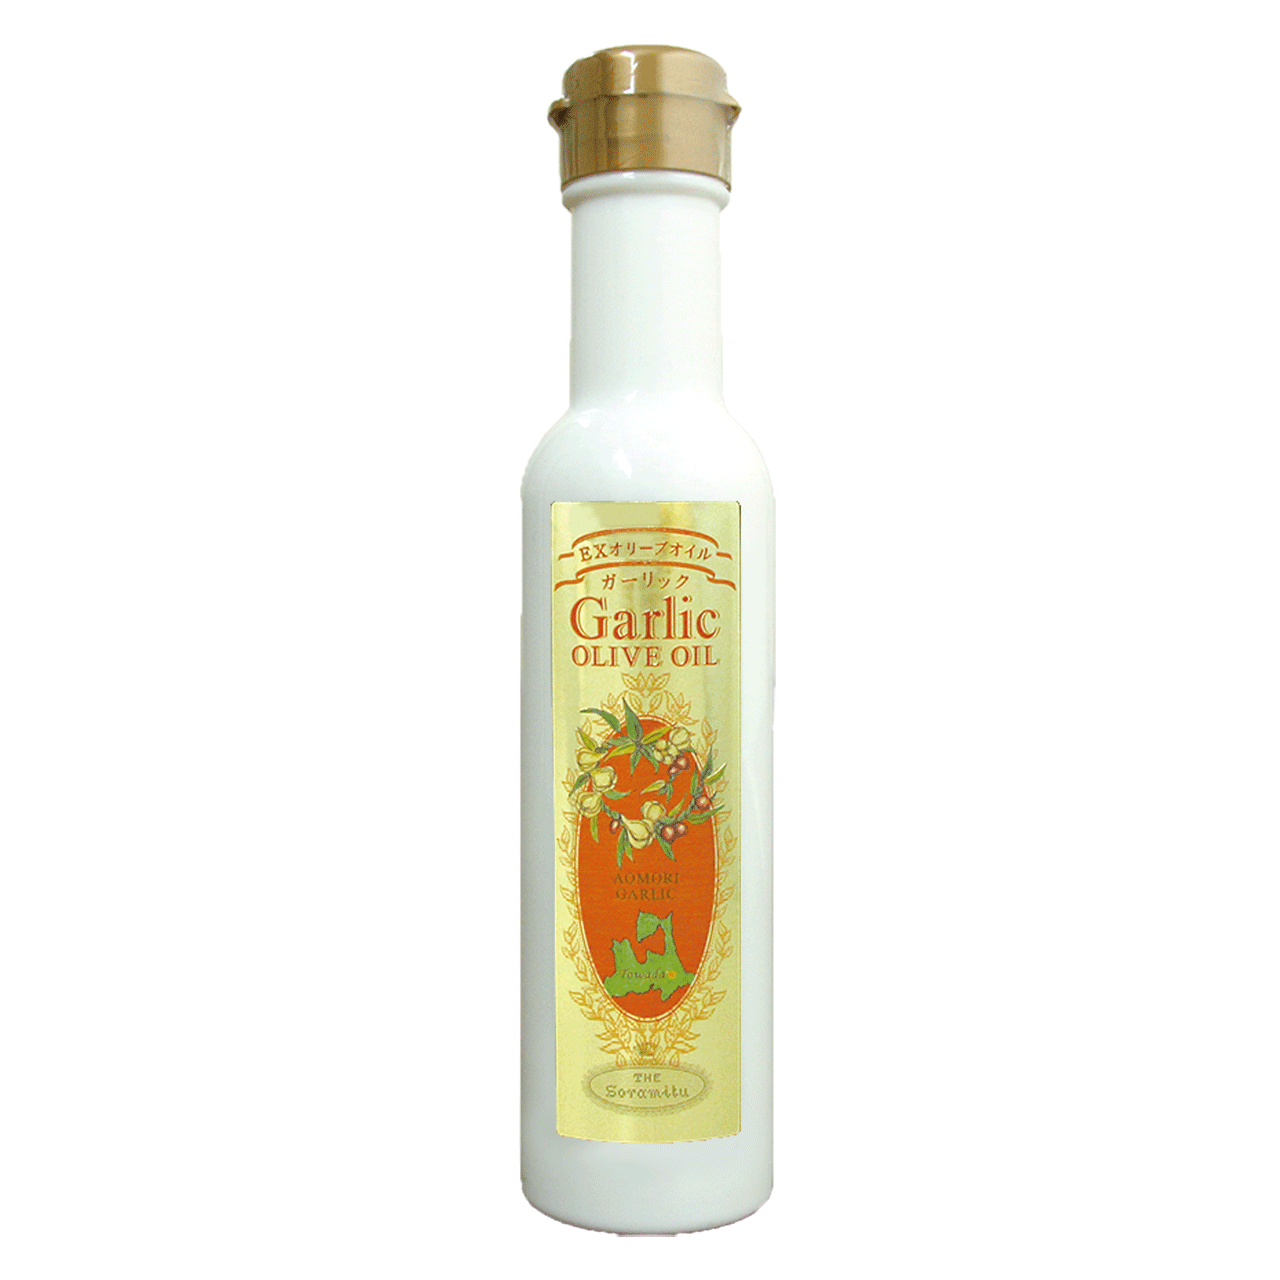 Garlic olive oil -Aomori garlic slowly marinated in extra virgin olive oil at low temperature